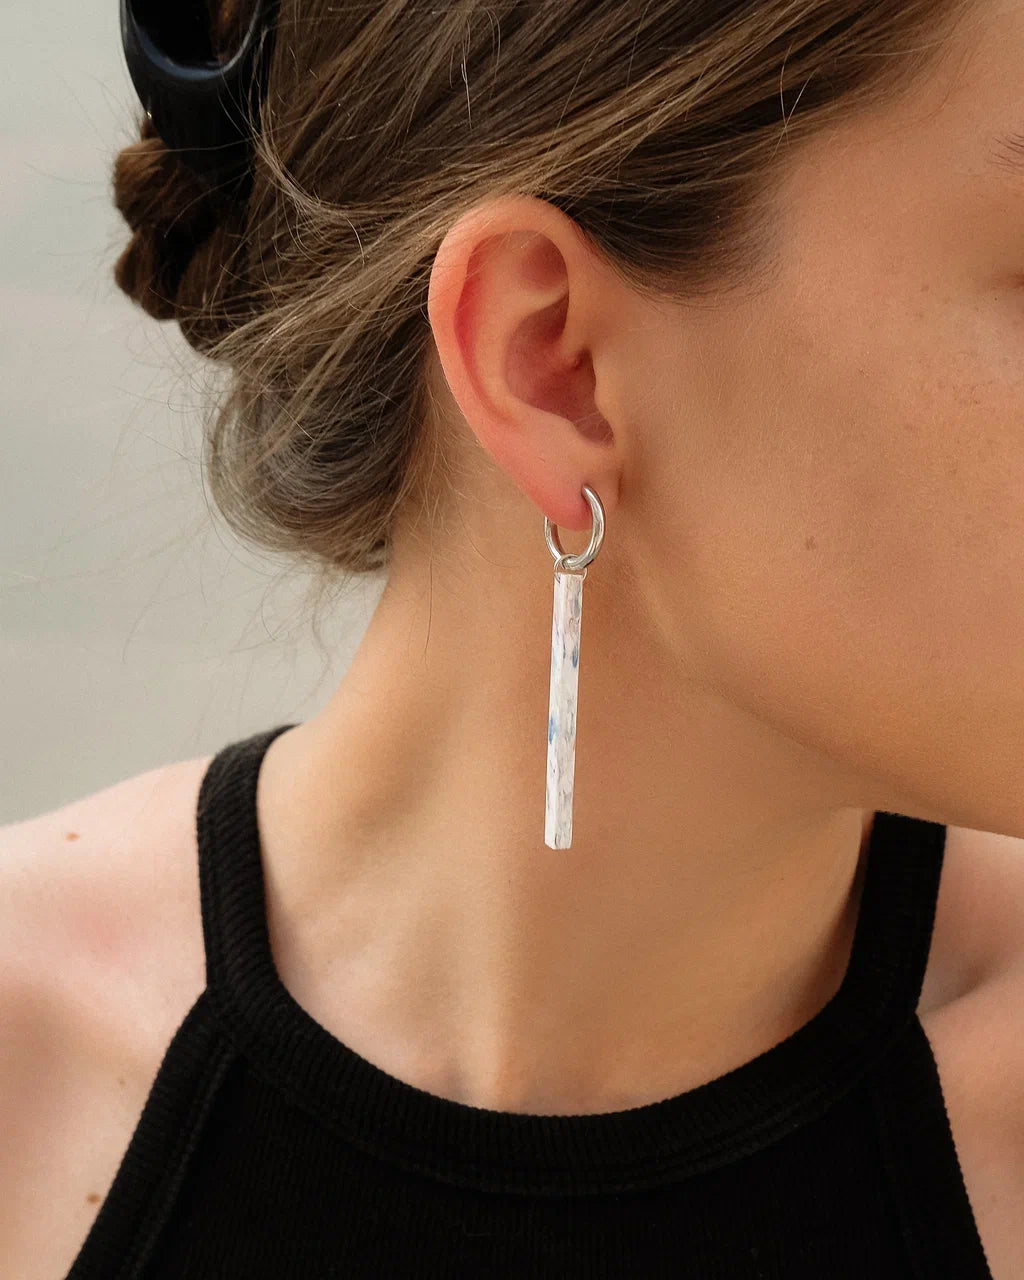 Silver Needle Drop Earrings With Tassel Chain Trendy Straight Hanging  Minimalist Jewelry For Women Wholesale Gift YME072 From Chinajewelry1989,  $2.62 | DHgate.Com